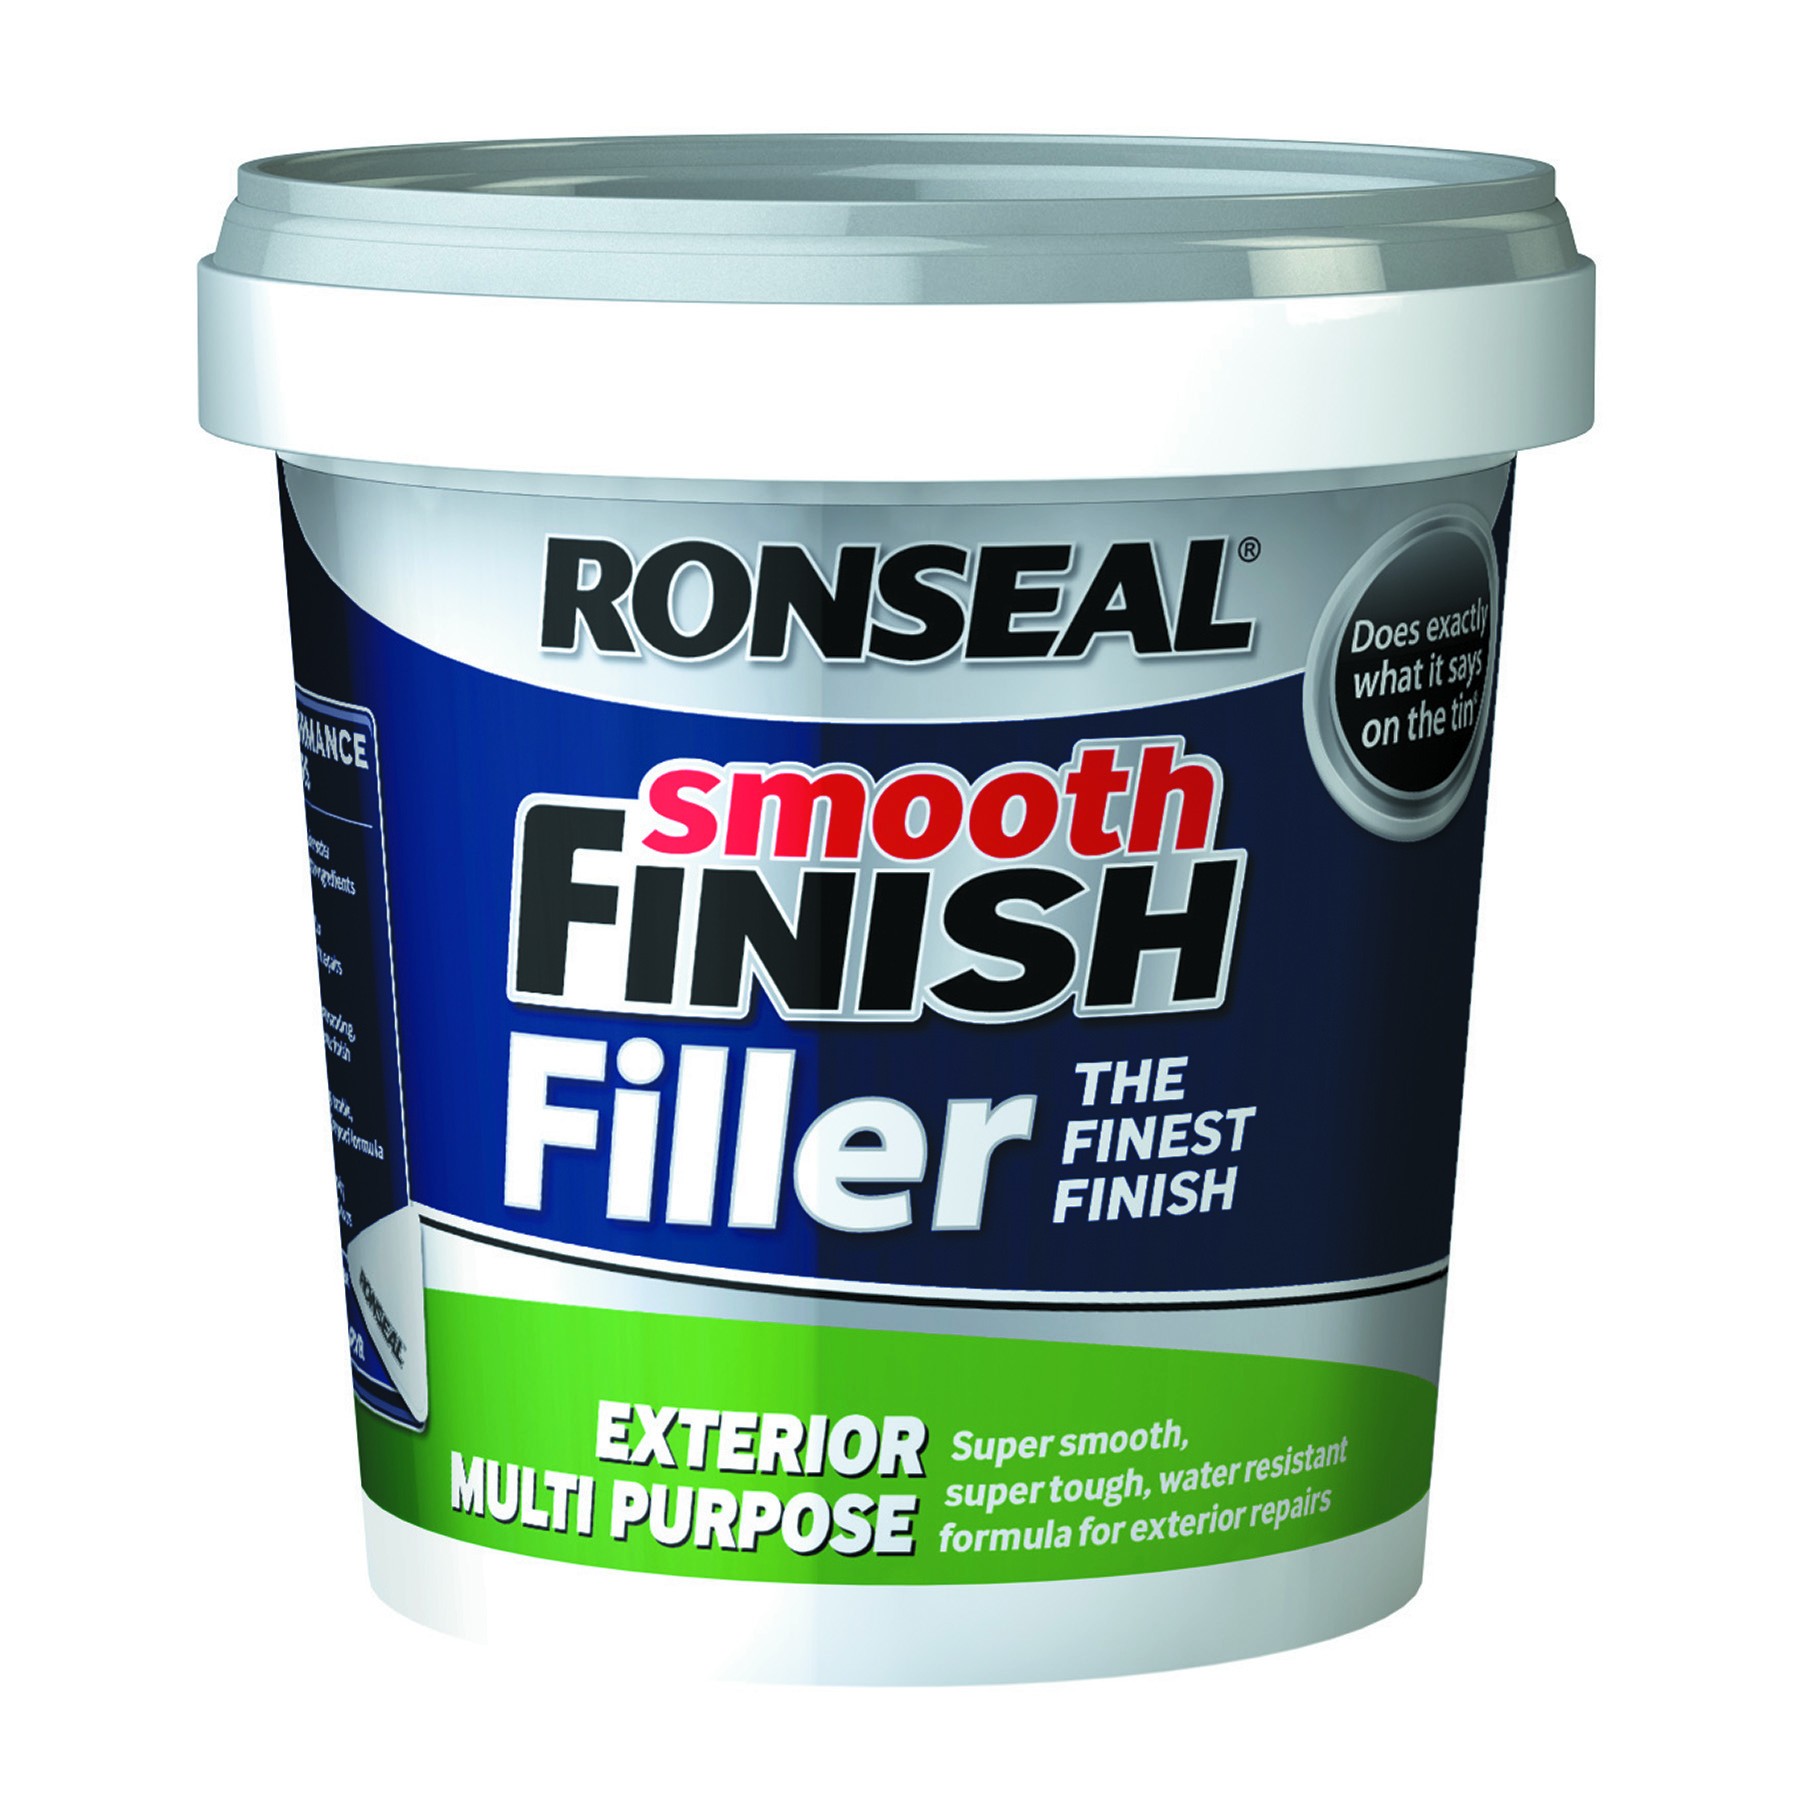 Ronseal Smooth Finish Exterior Wall Filler 330g [RONS36561]